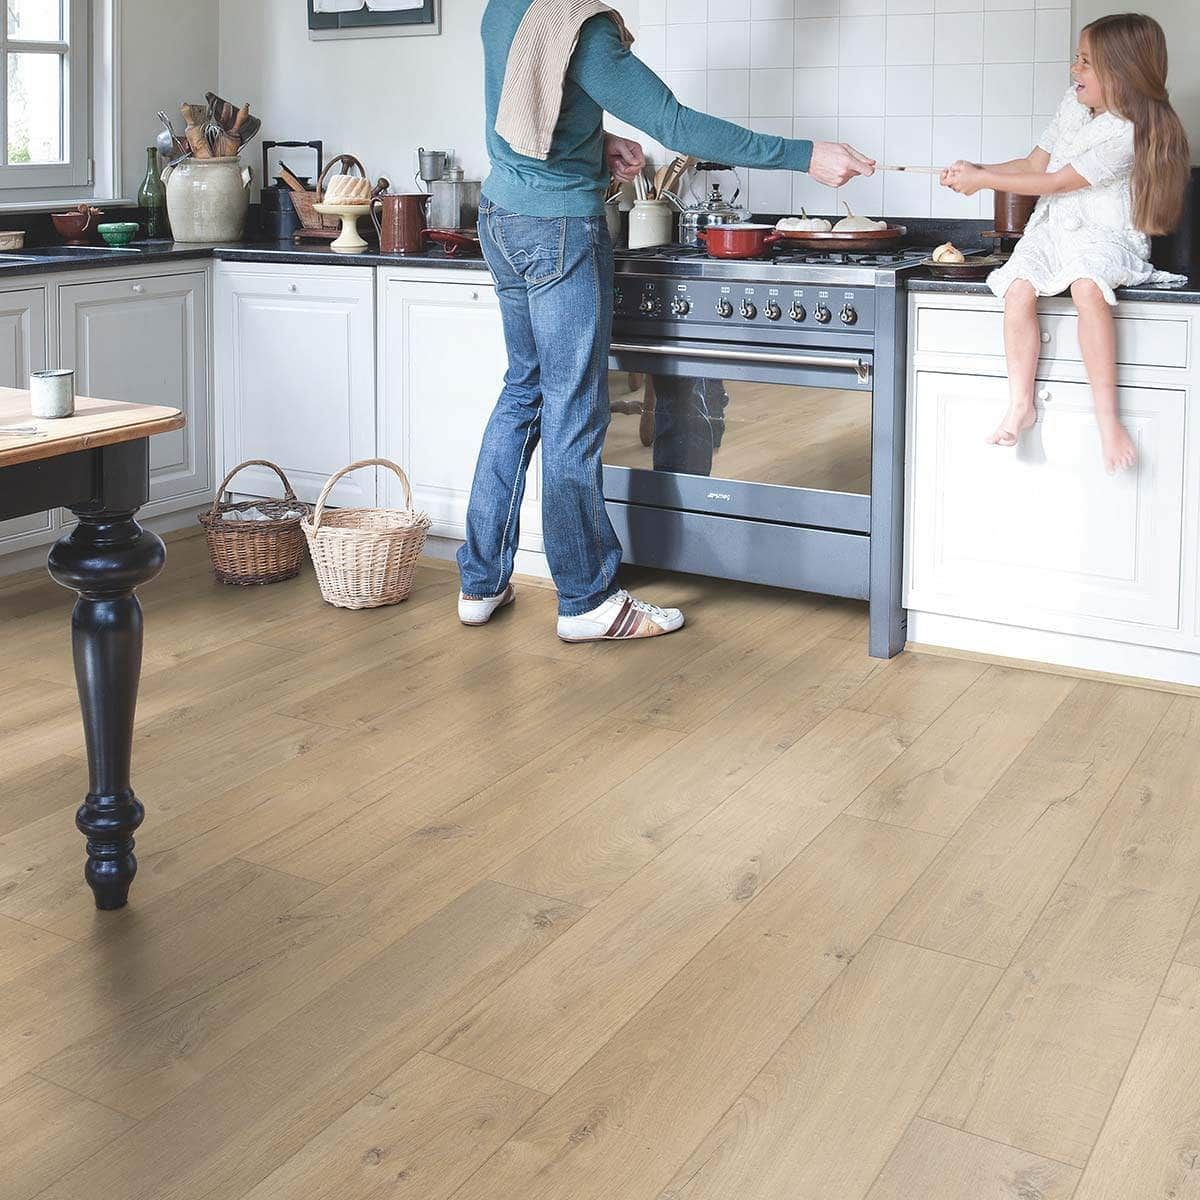 Real oak flooring is all what you need